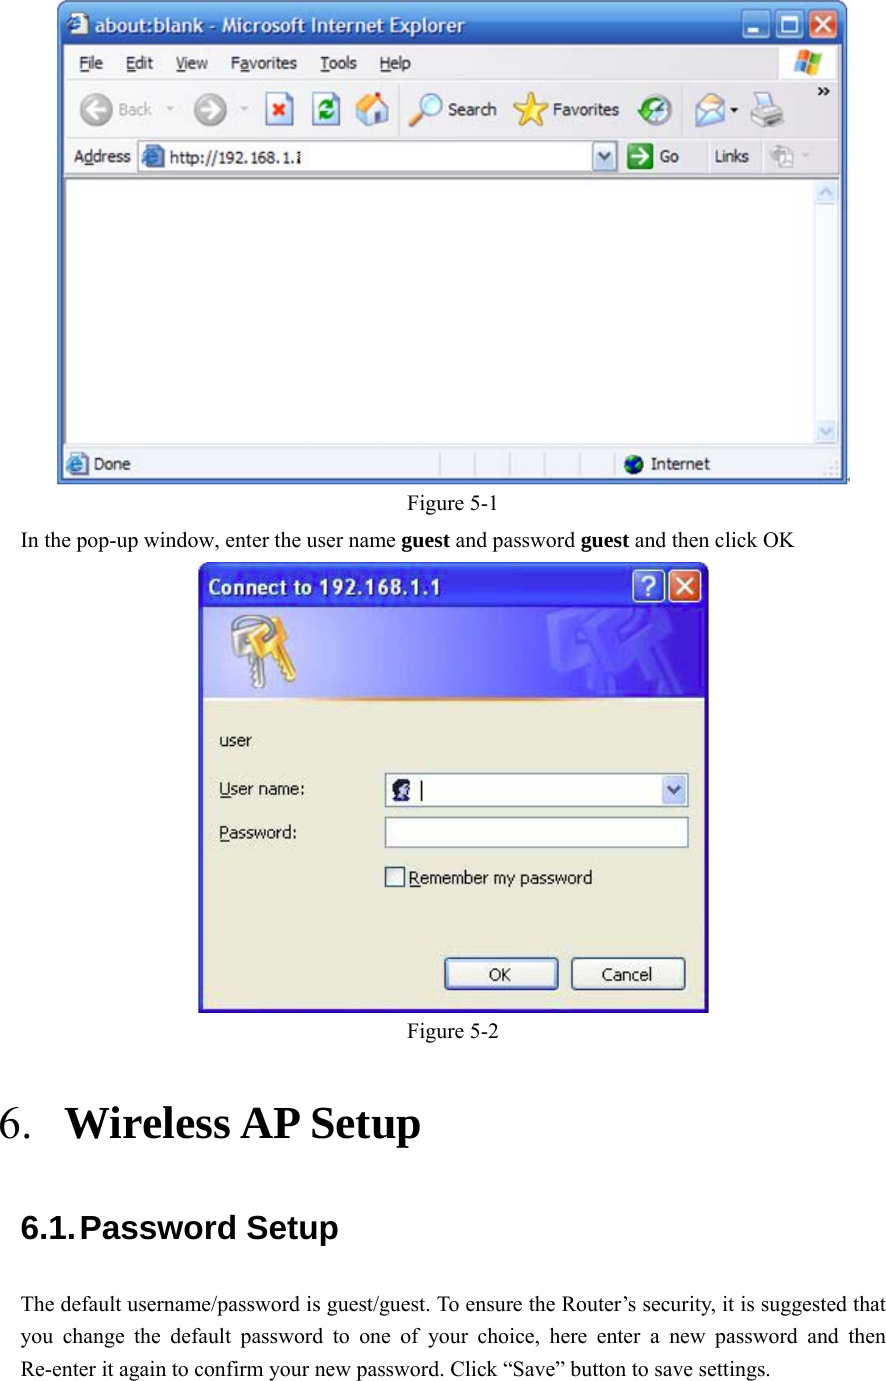    Figure 5-1 In the pop-up window, enter the user name guest and password guest and then click OK  Figure 5-2 6. Wireless AP Setup 6.1. Password  Setup The default username/password is guest/guest. To ensure the Router’s security, it is suggested that you change the default password to one of your choice, here enter a new password and then Re-enter it again to confirm your new password. Click “Save” button to save settings. 